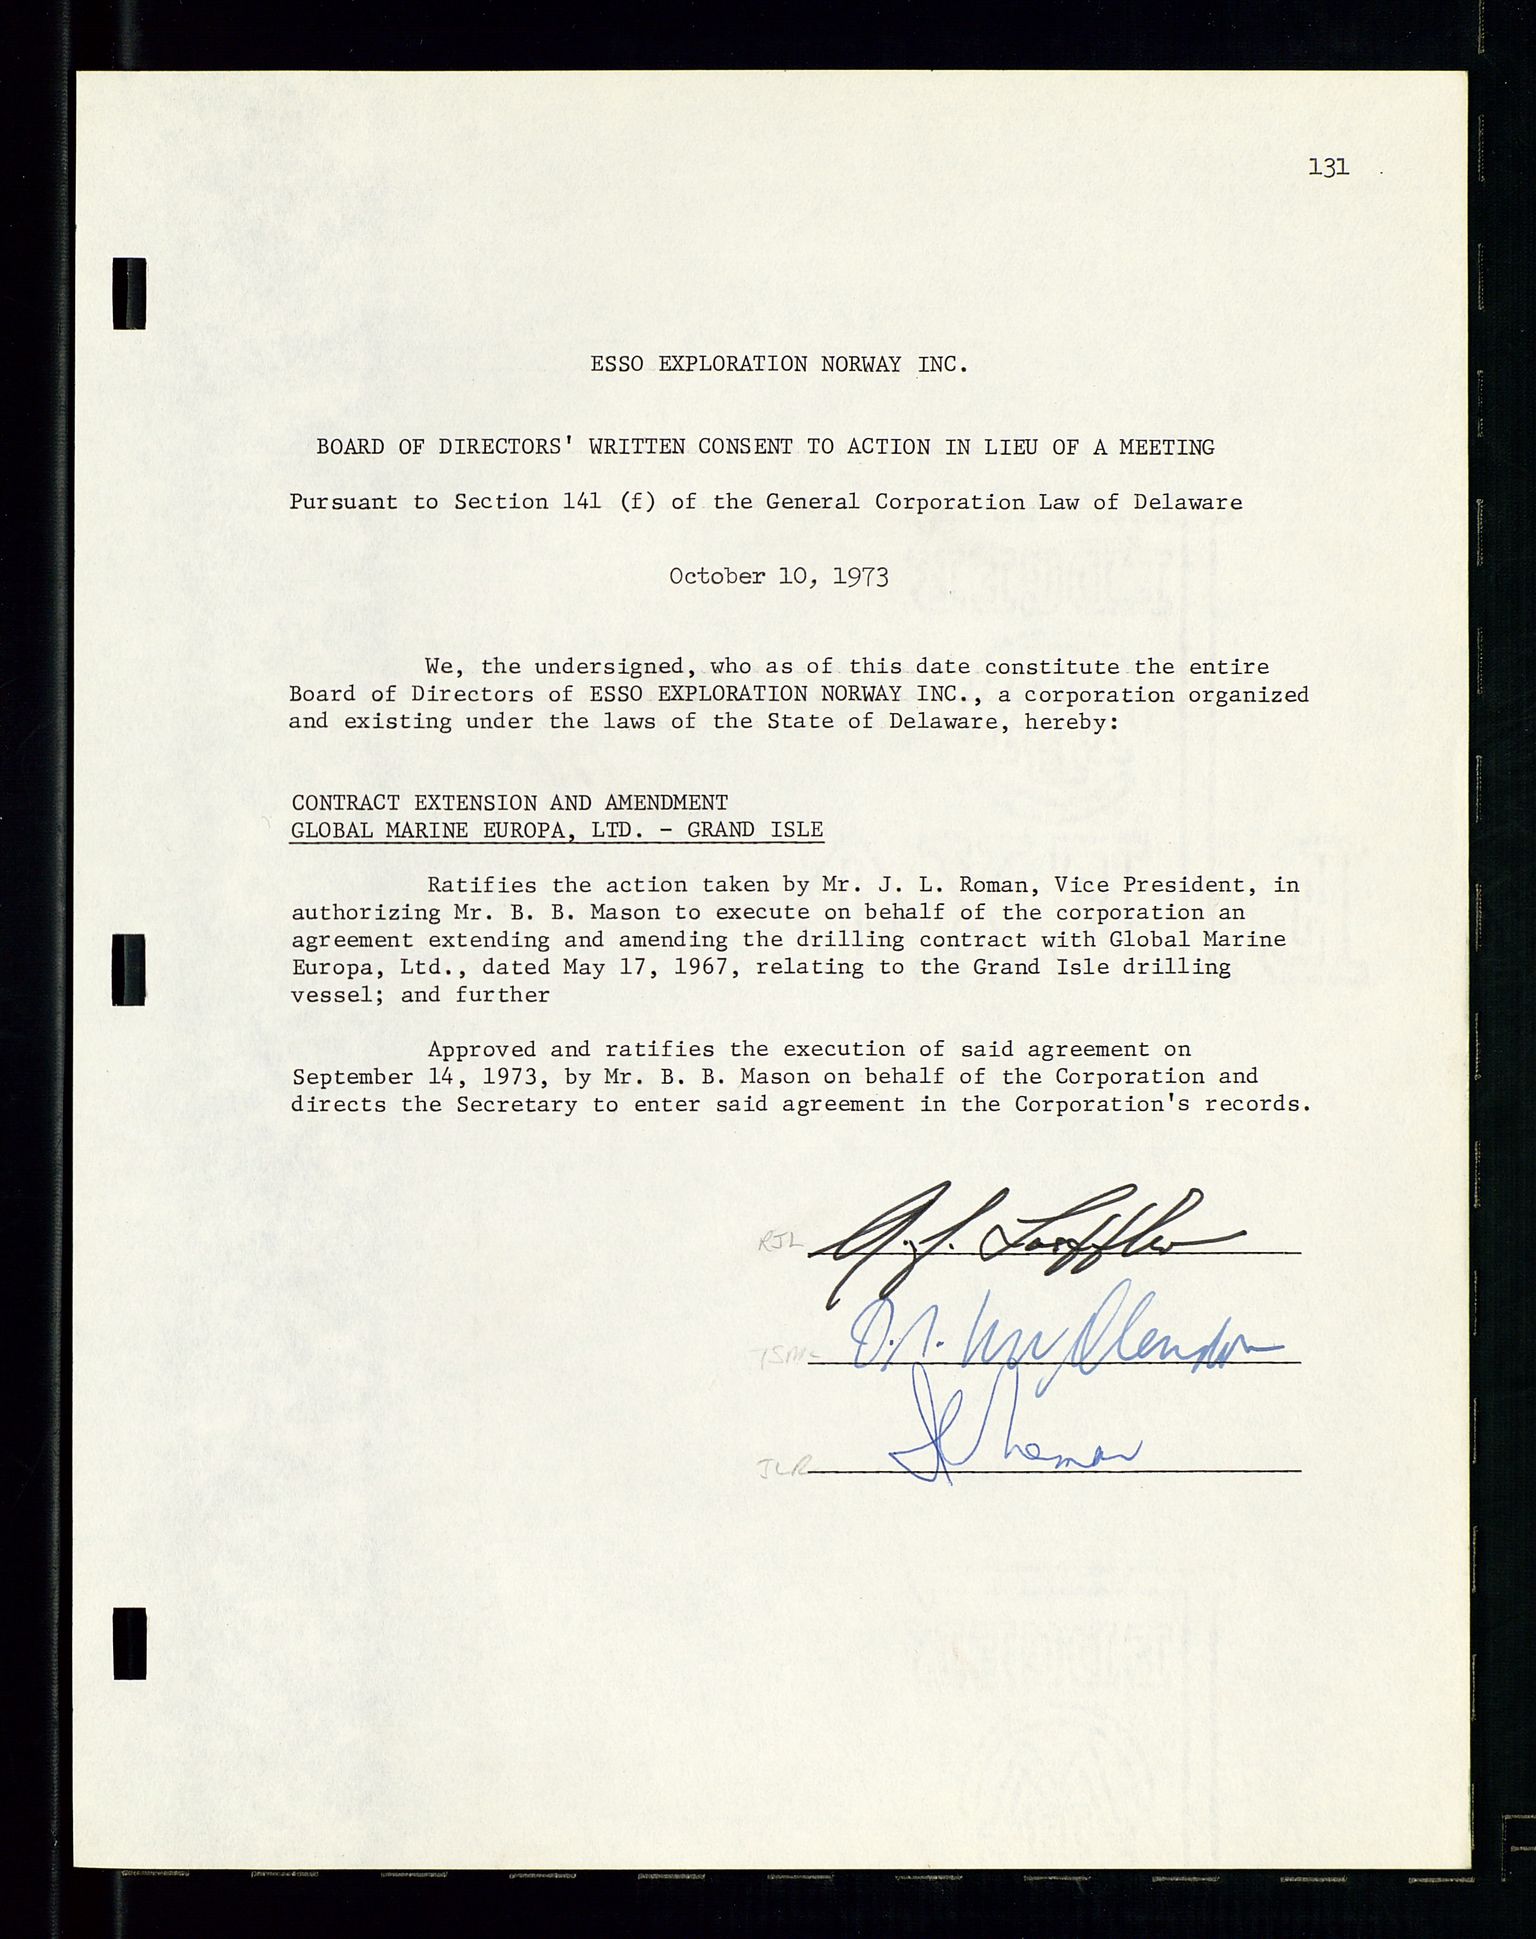 Pa 1512 - Esso Exploration and Production Norway Inc., SAST/A-101917/A/Aa/L0001/0001: Styredokumenter / Corporate records, By-Laws, Board meeting minutes, Incorporations, 1965-1975, s. 131